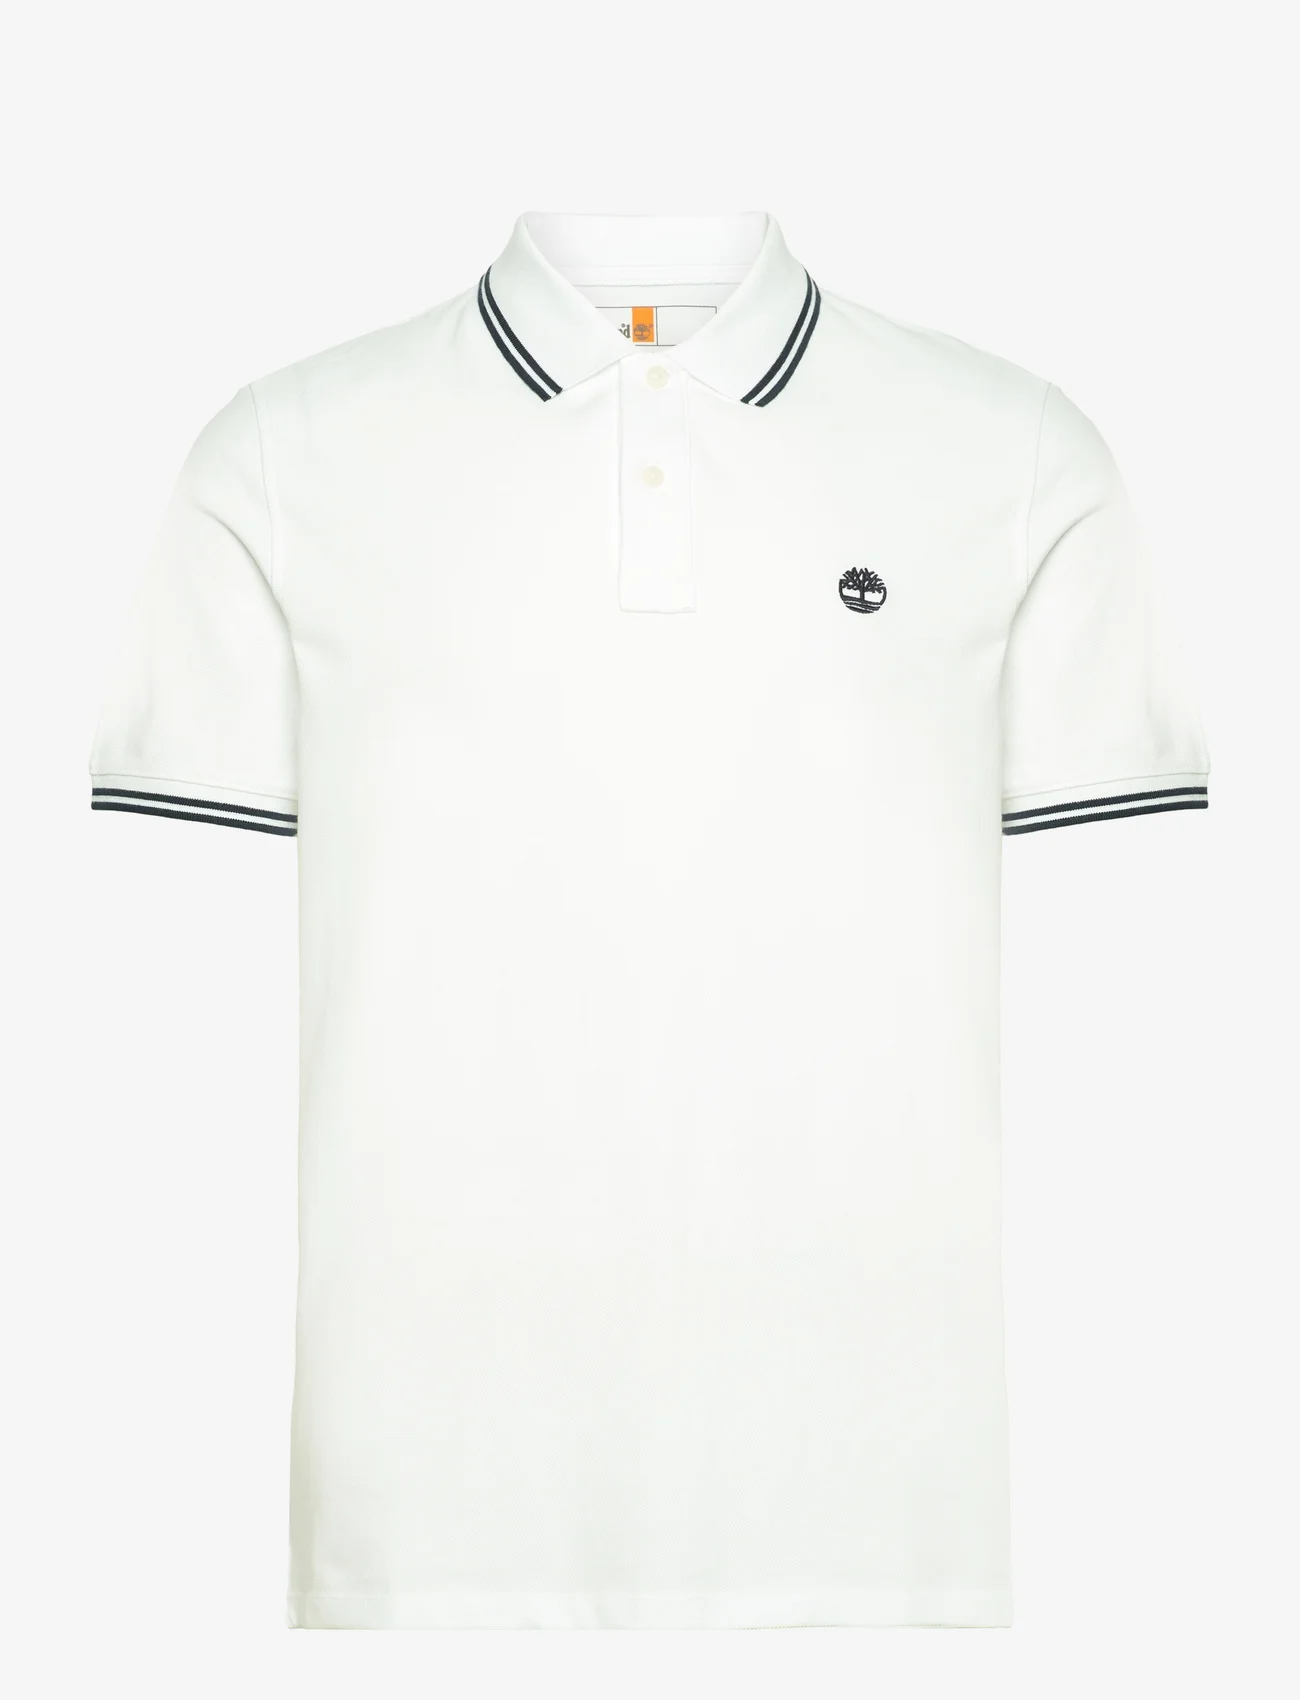 Timberland - MILLERS RIVER Tipped Pique Short Sleeve Polo WHITE - kortærmede poloer - white - 0